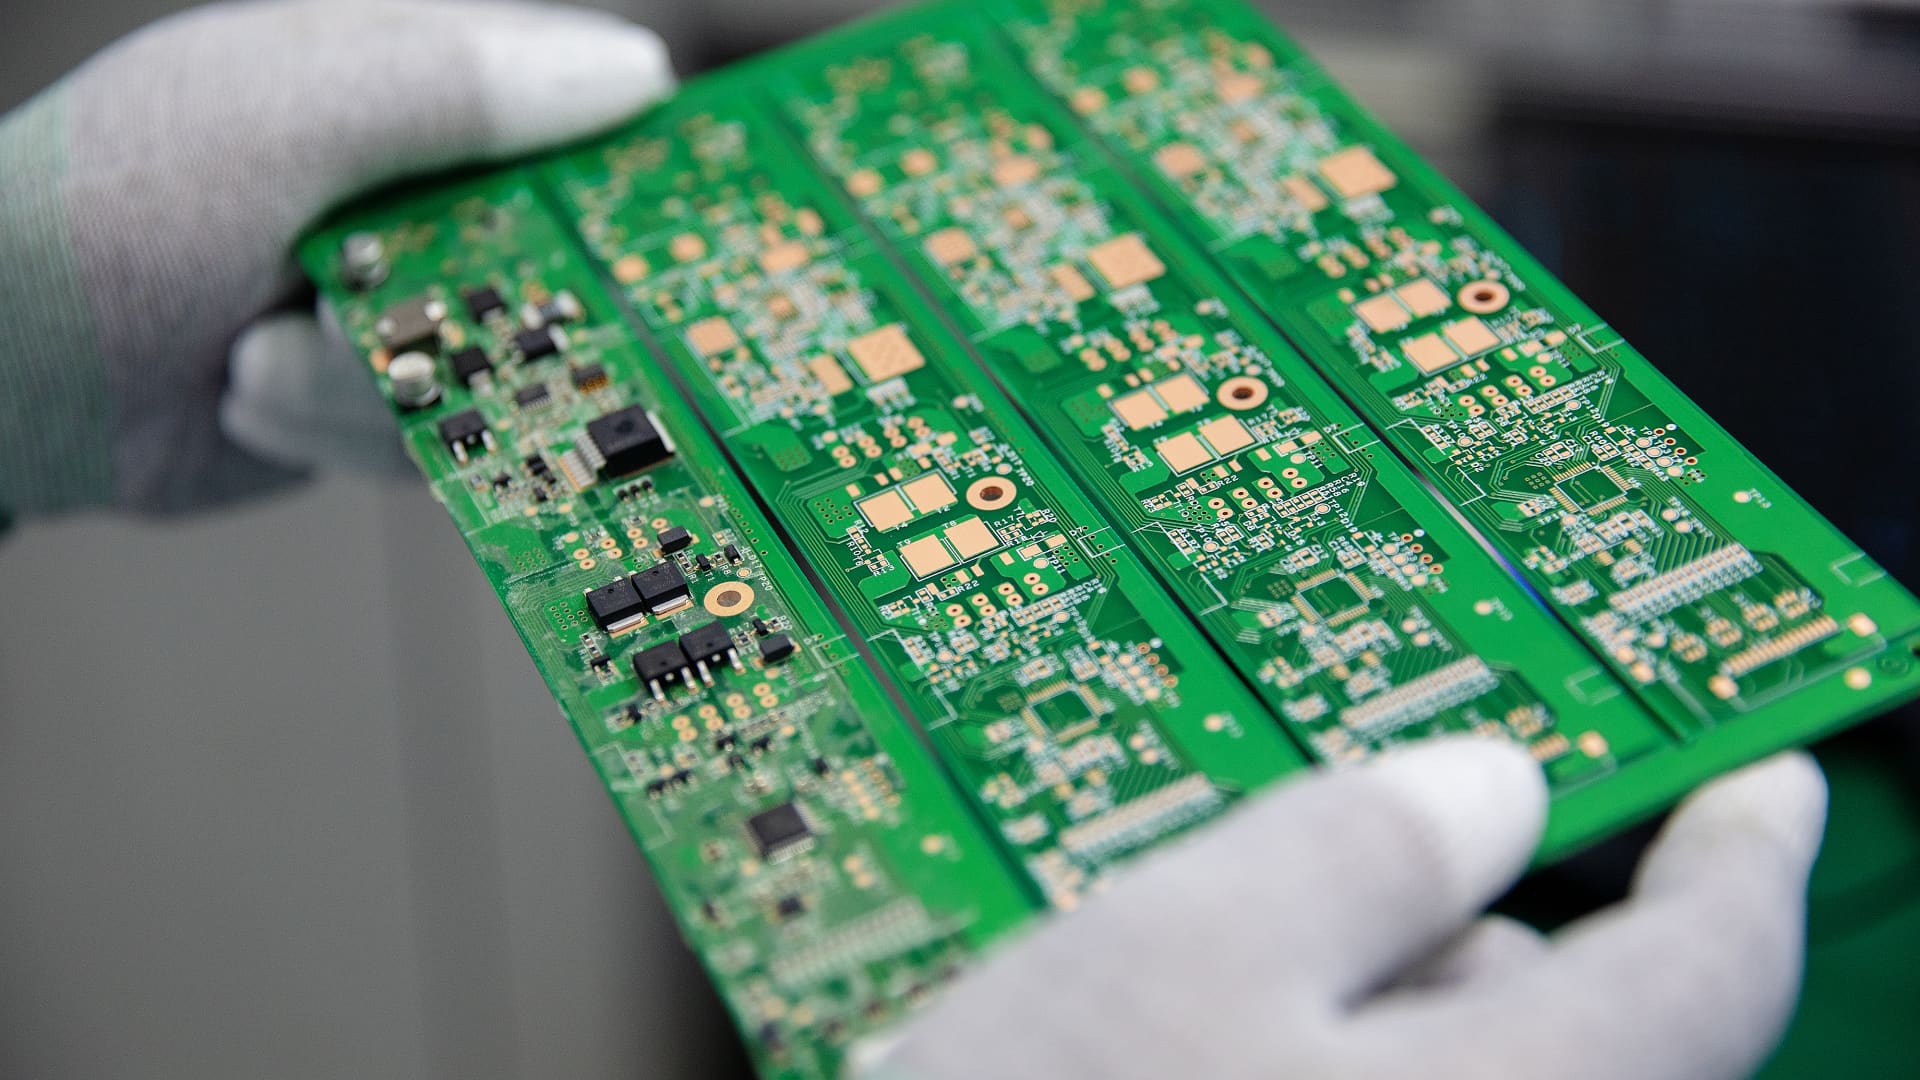 The worst is over for the global chip shortage, ABB chairman says: ‘I’m quite optimistic’